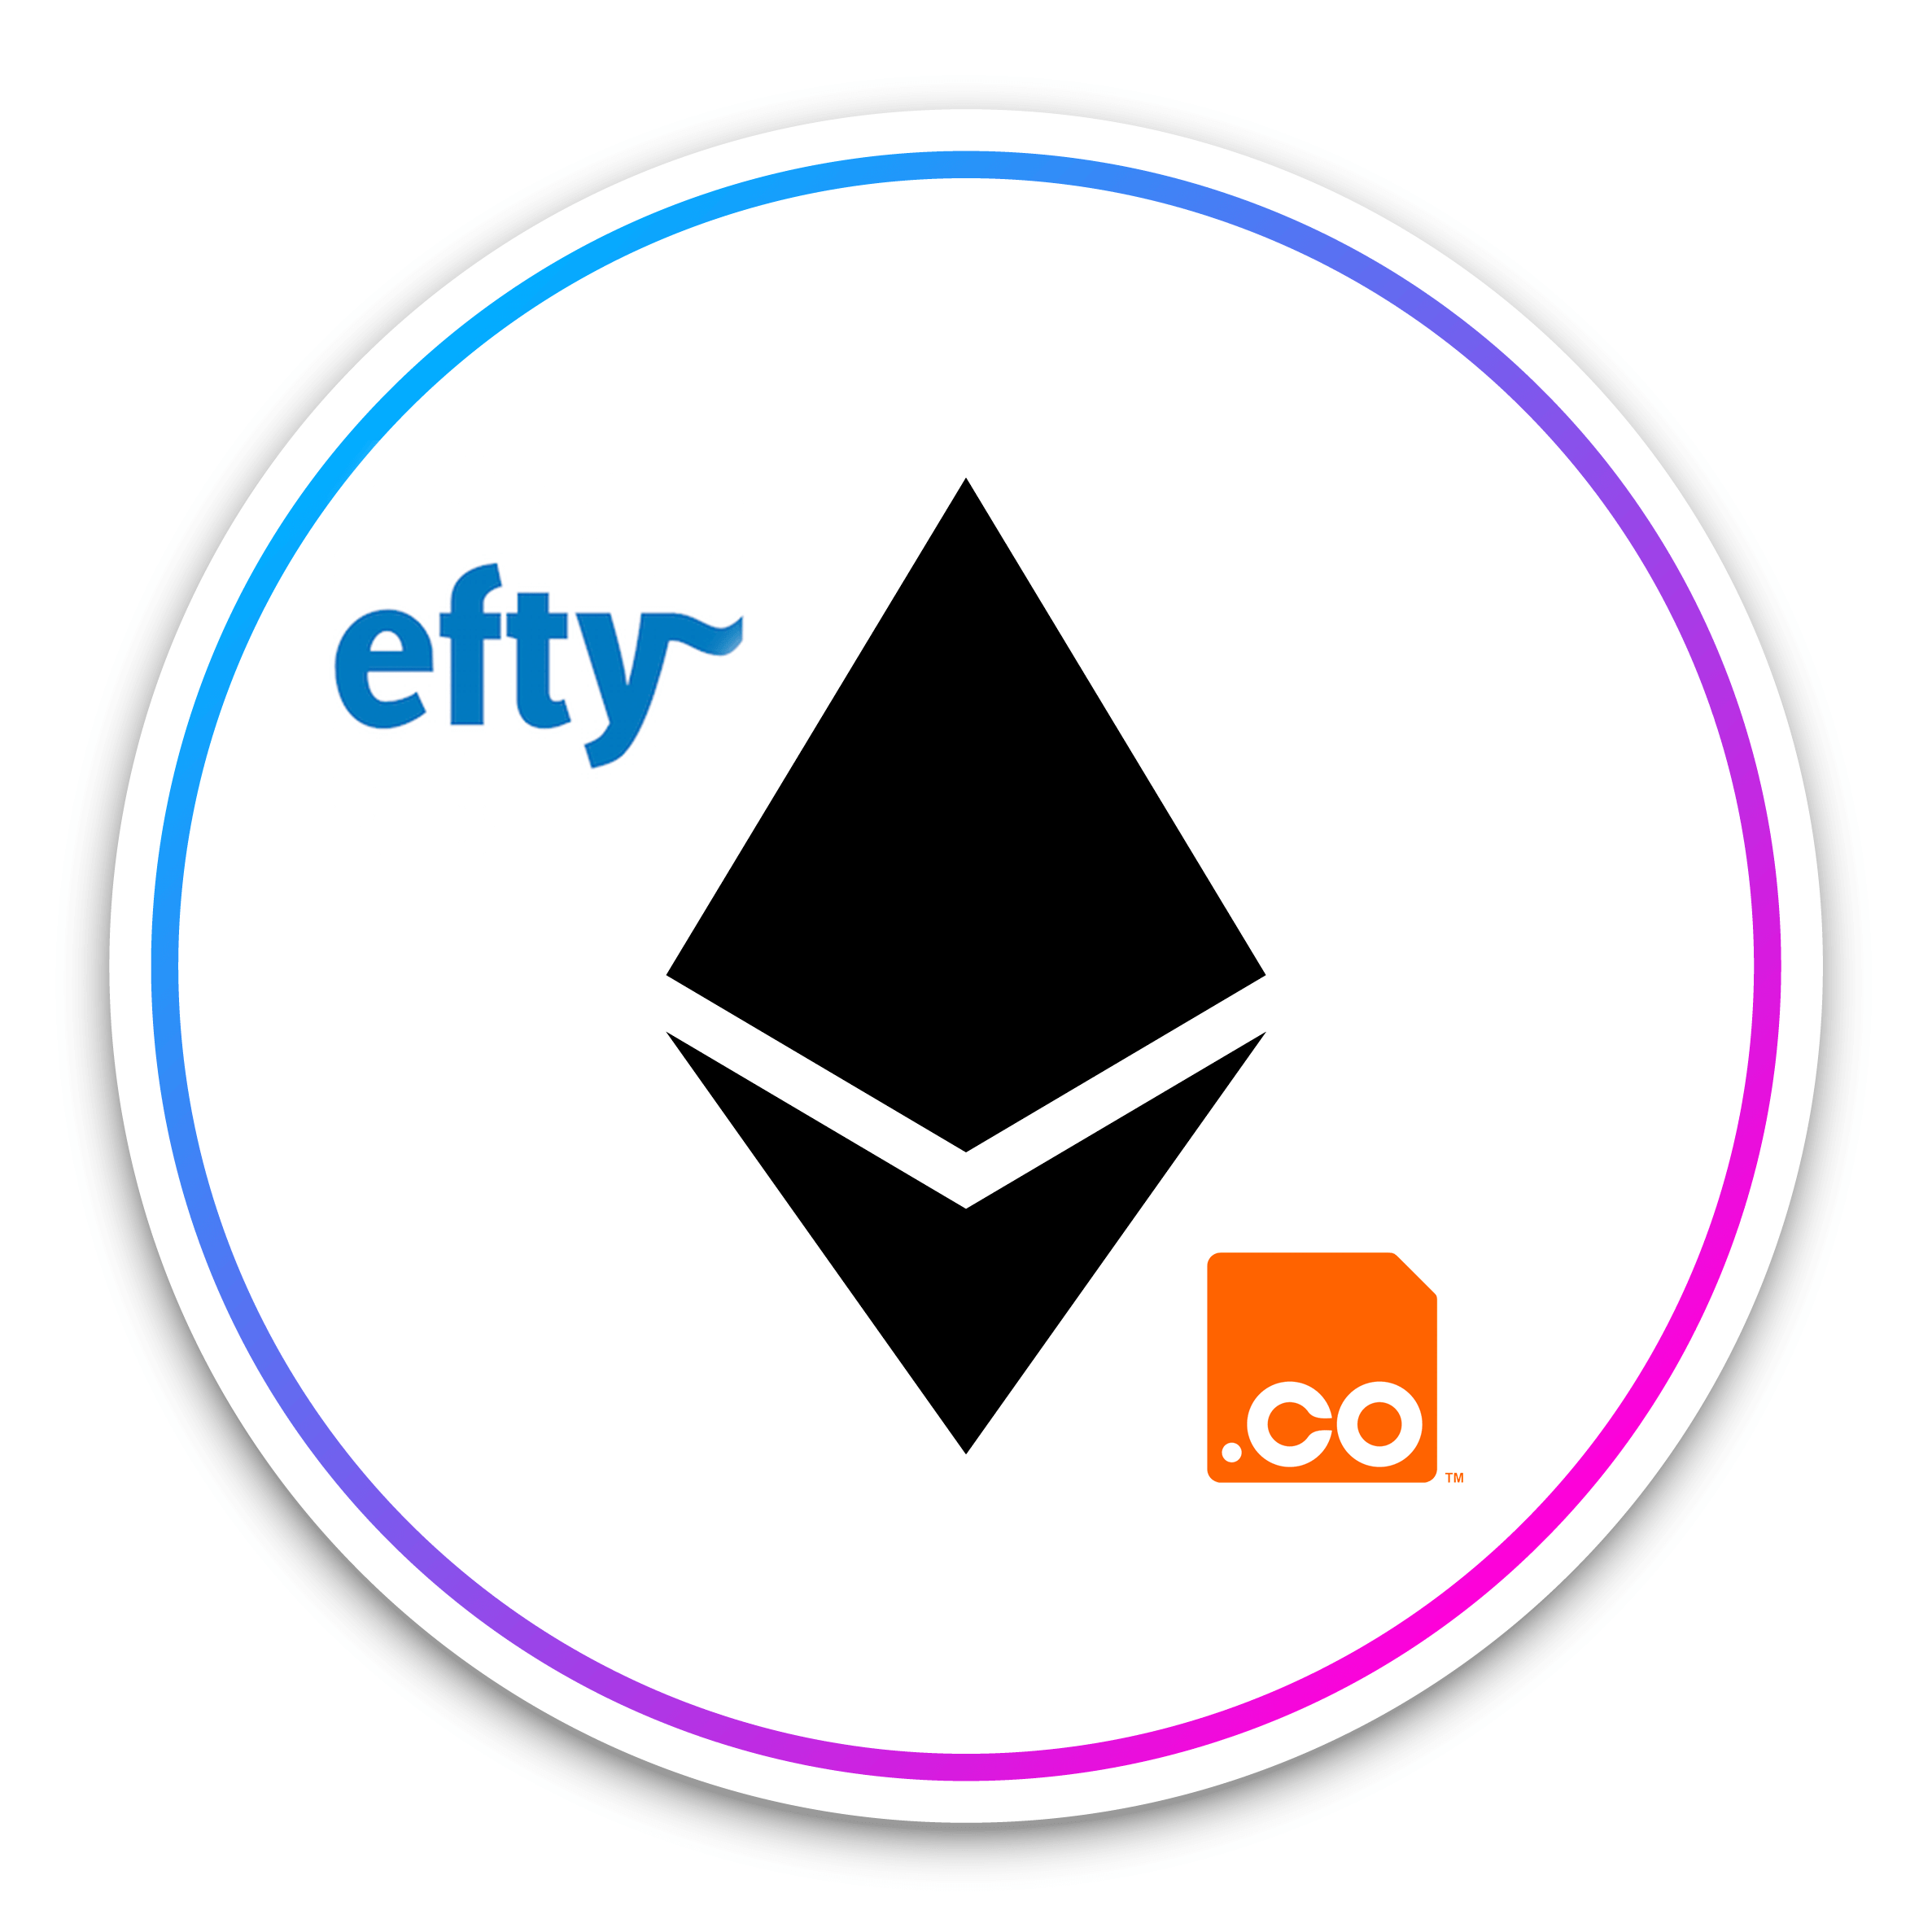 From $25 to $300,000 – ETH.co sells through Efty.com after an 11 year hold